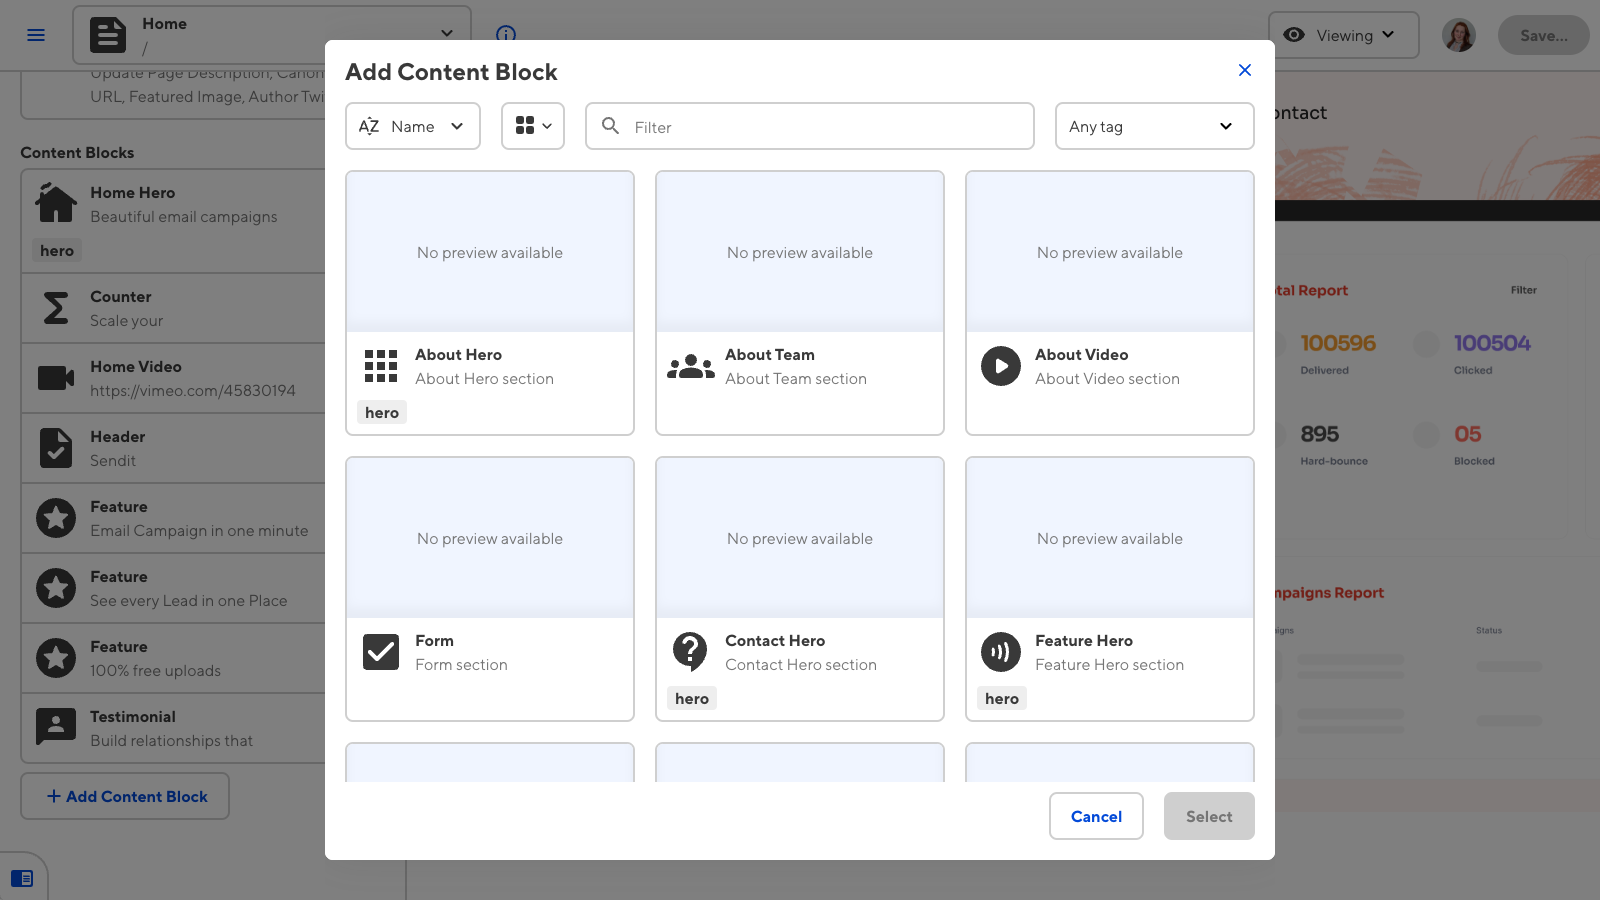 A screenshot of the CloudCannon app shows a pop-up modal for selecting a structure to add to the Content Block array.